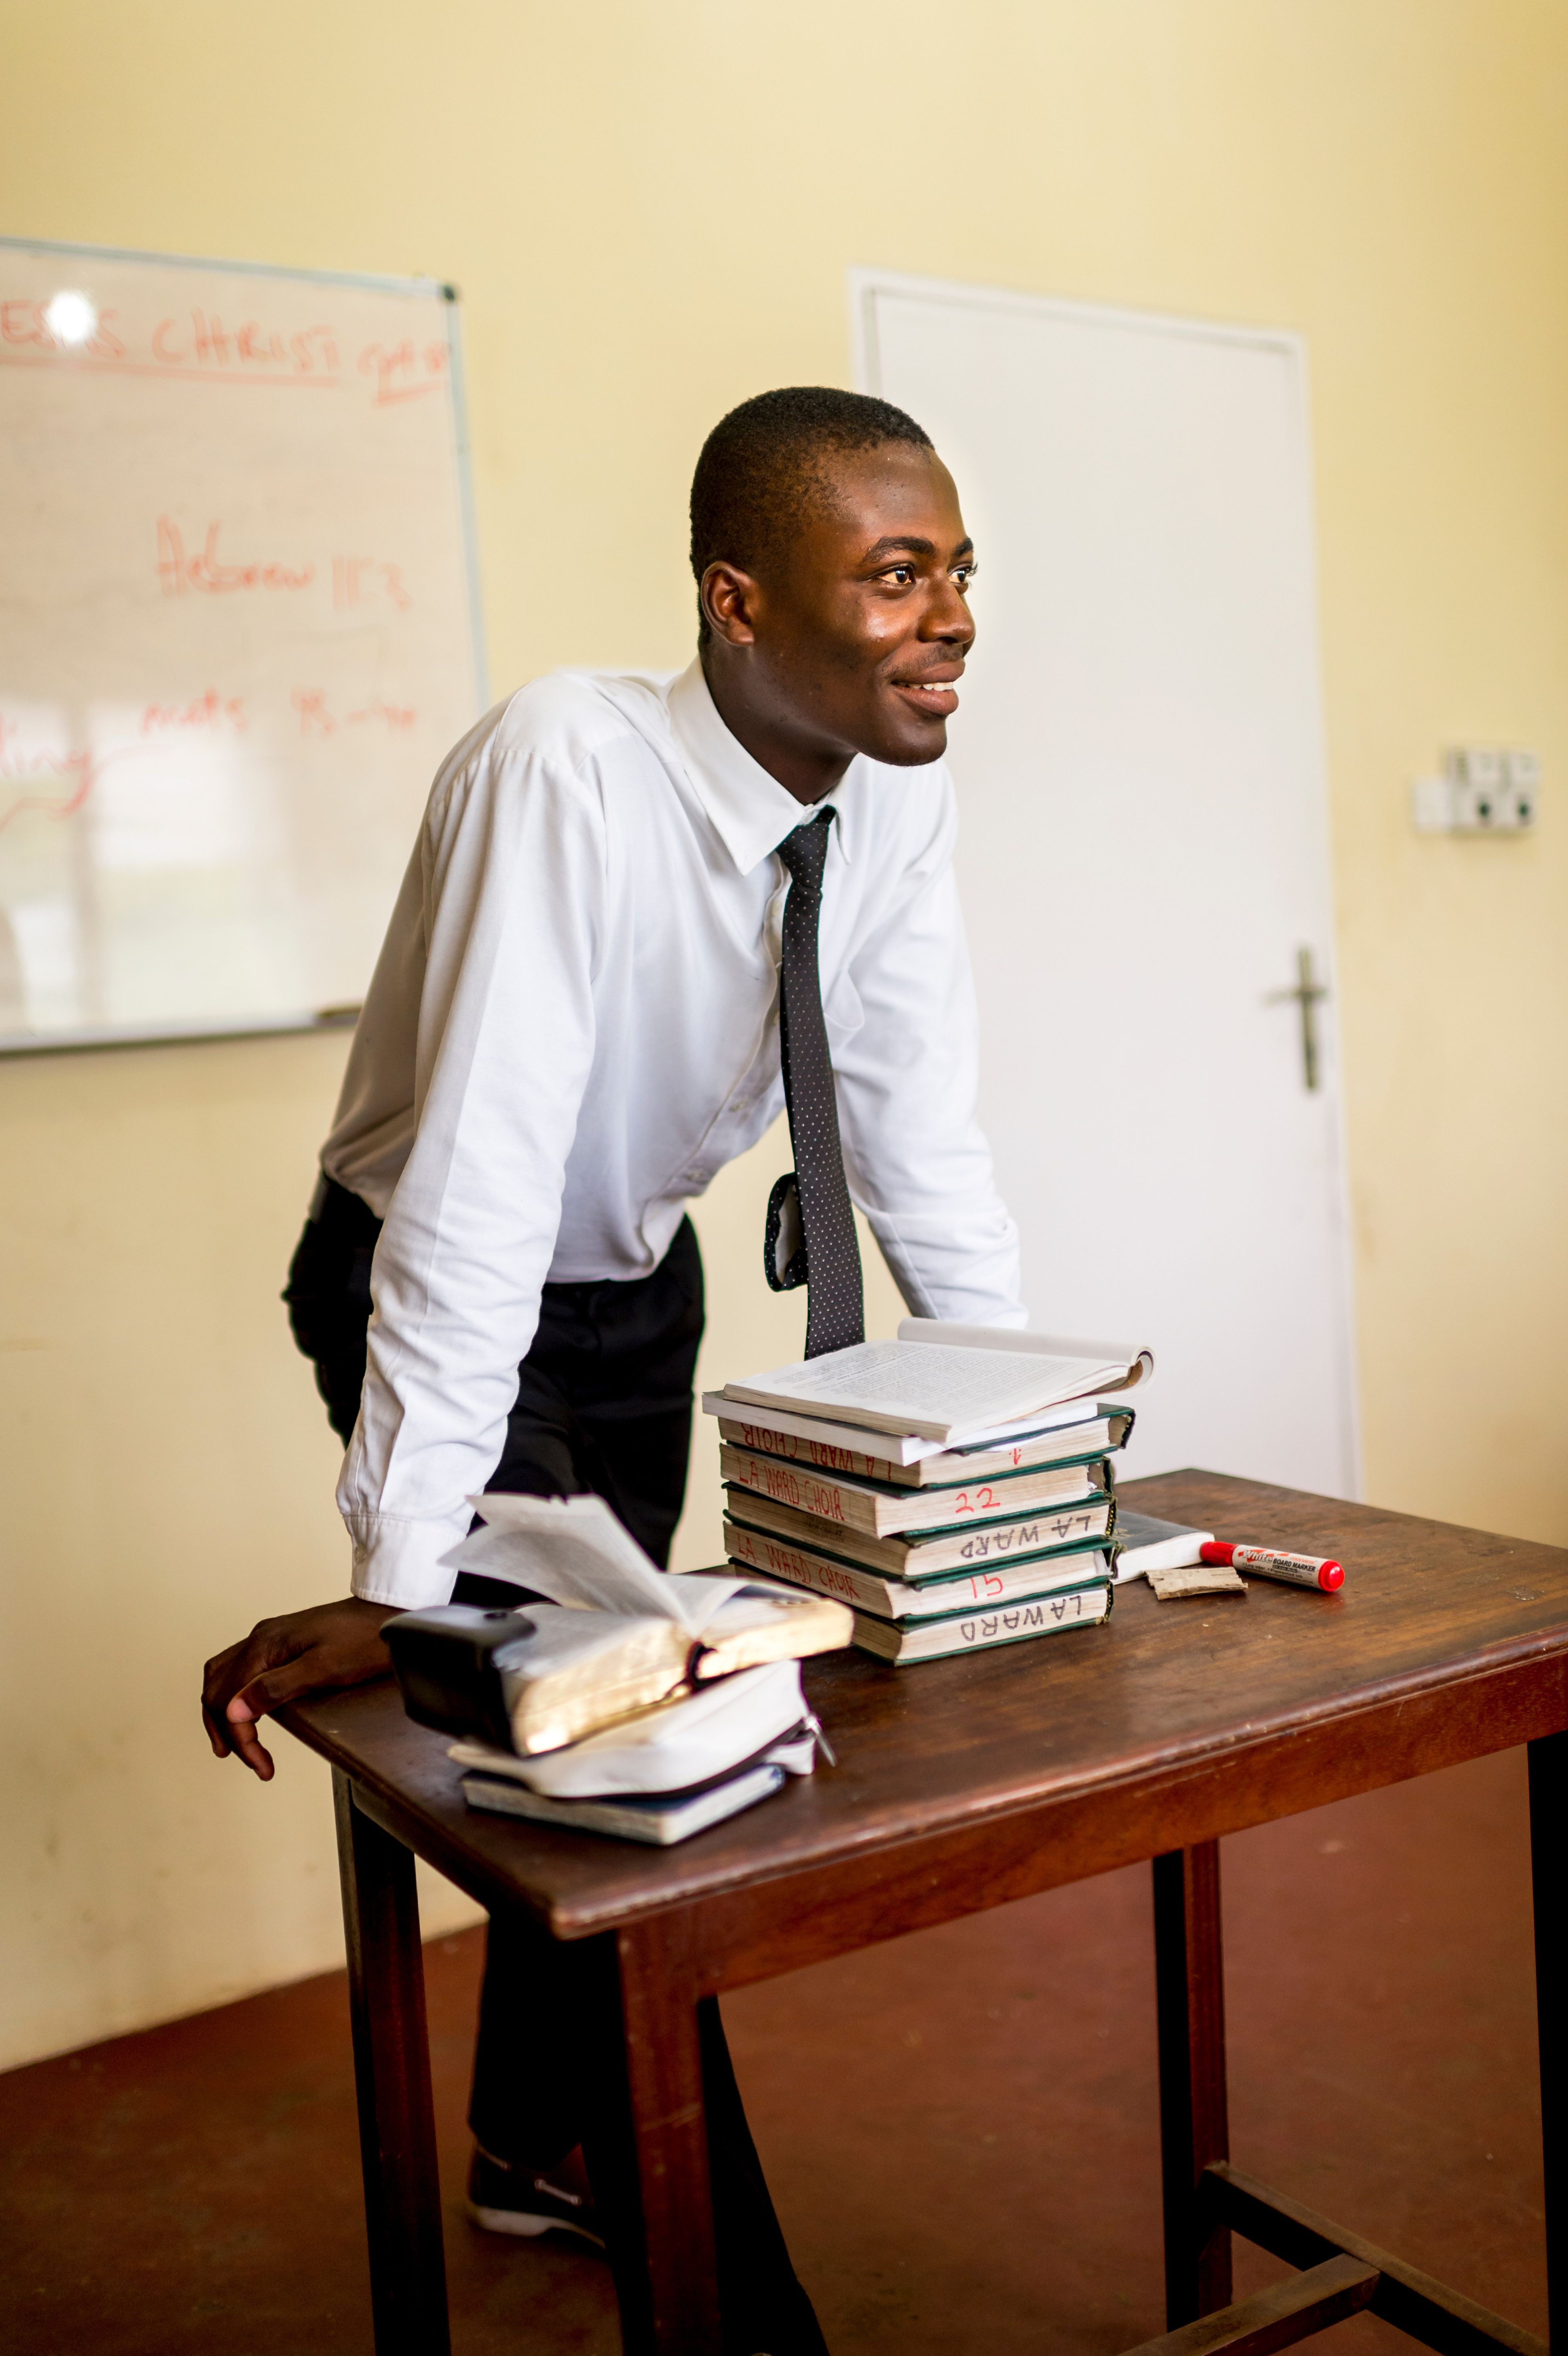 A teacher stands at the front of his classroom with hymnbooks and scriptures on a table in front of him.  